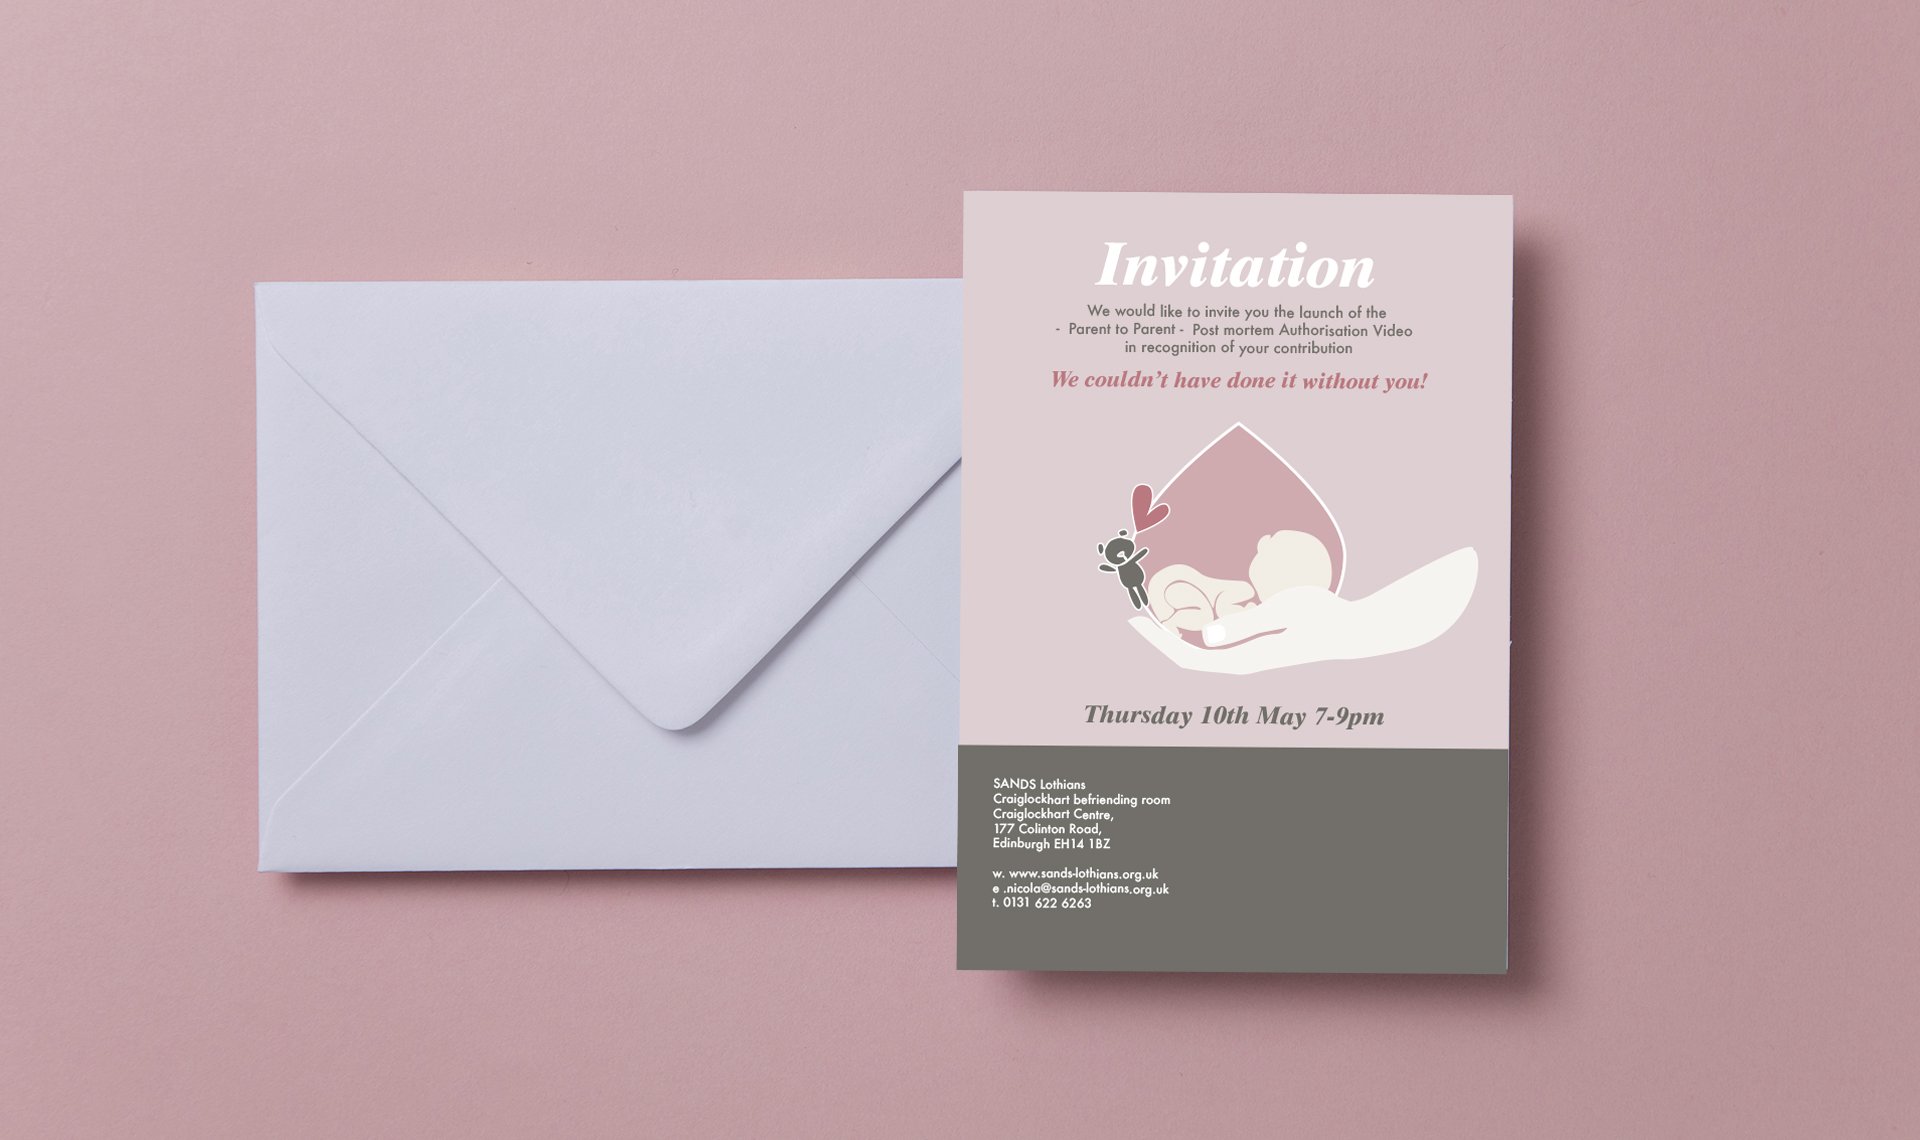 Invitation to Sands 'Parent to Parent' launch night concerning stillbirth and loss of child during pregnancy